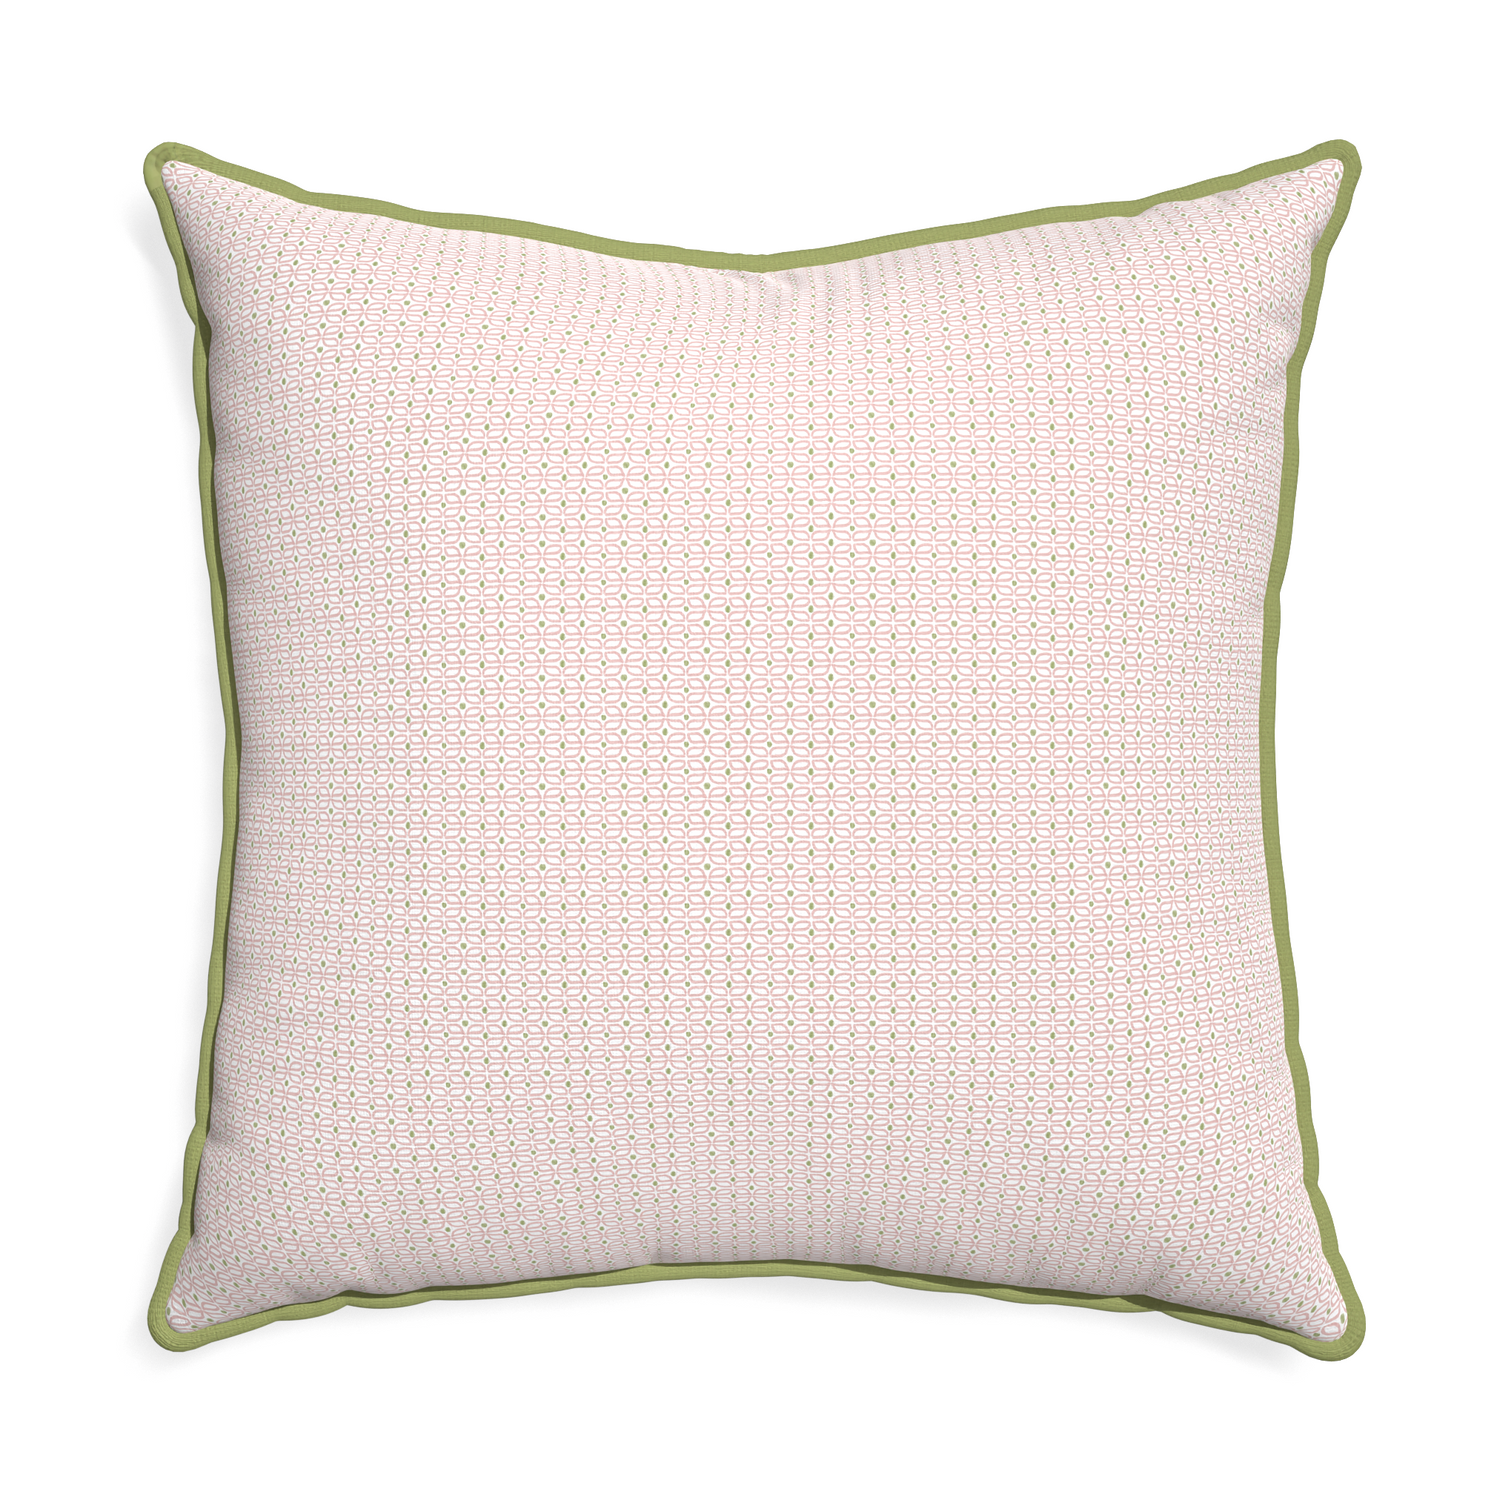 Euro-sham loomi pink custom pink geometricpillow with moss piping on white background